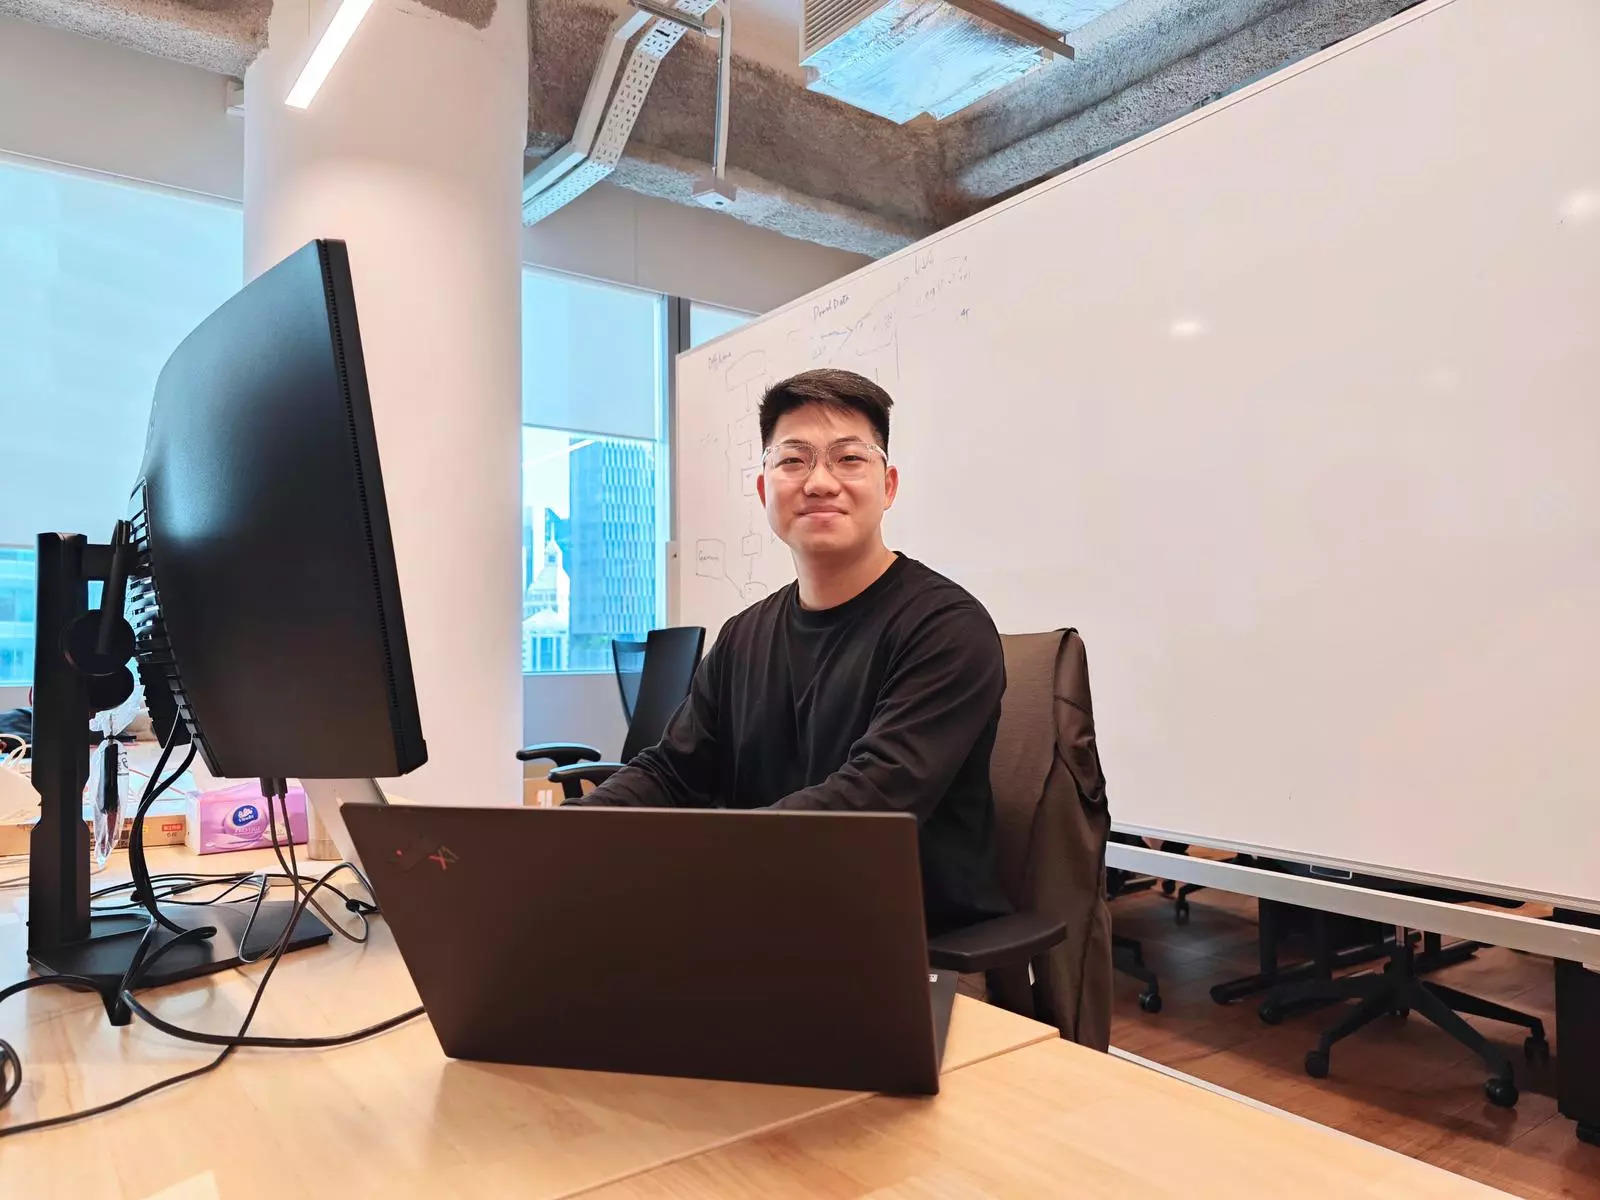 Computer science major Xinrui Gao told Insider that some of his juniors were interning even before freshman year started.